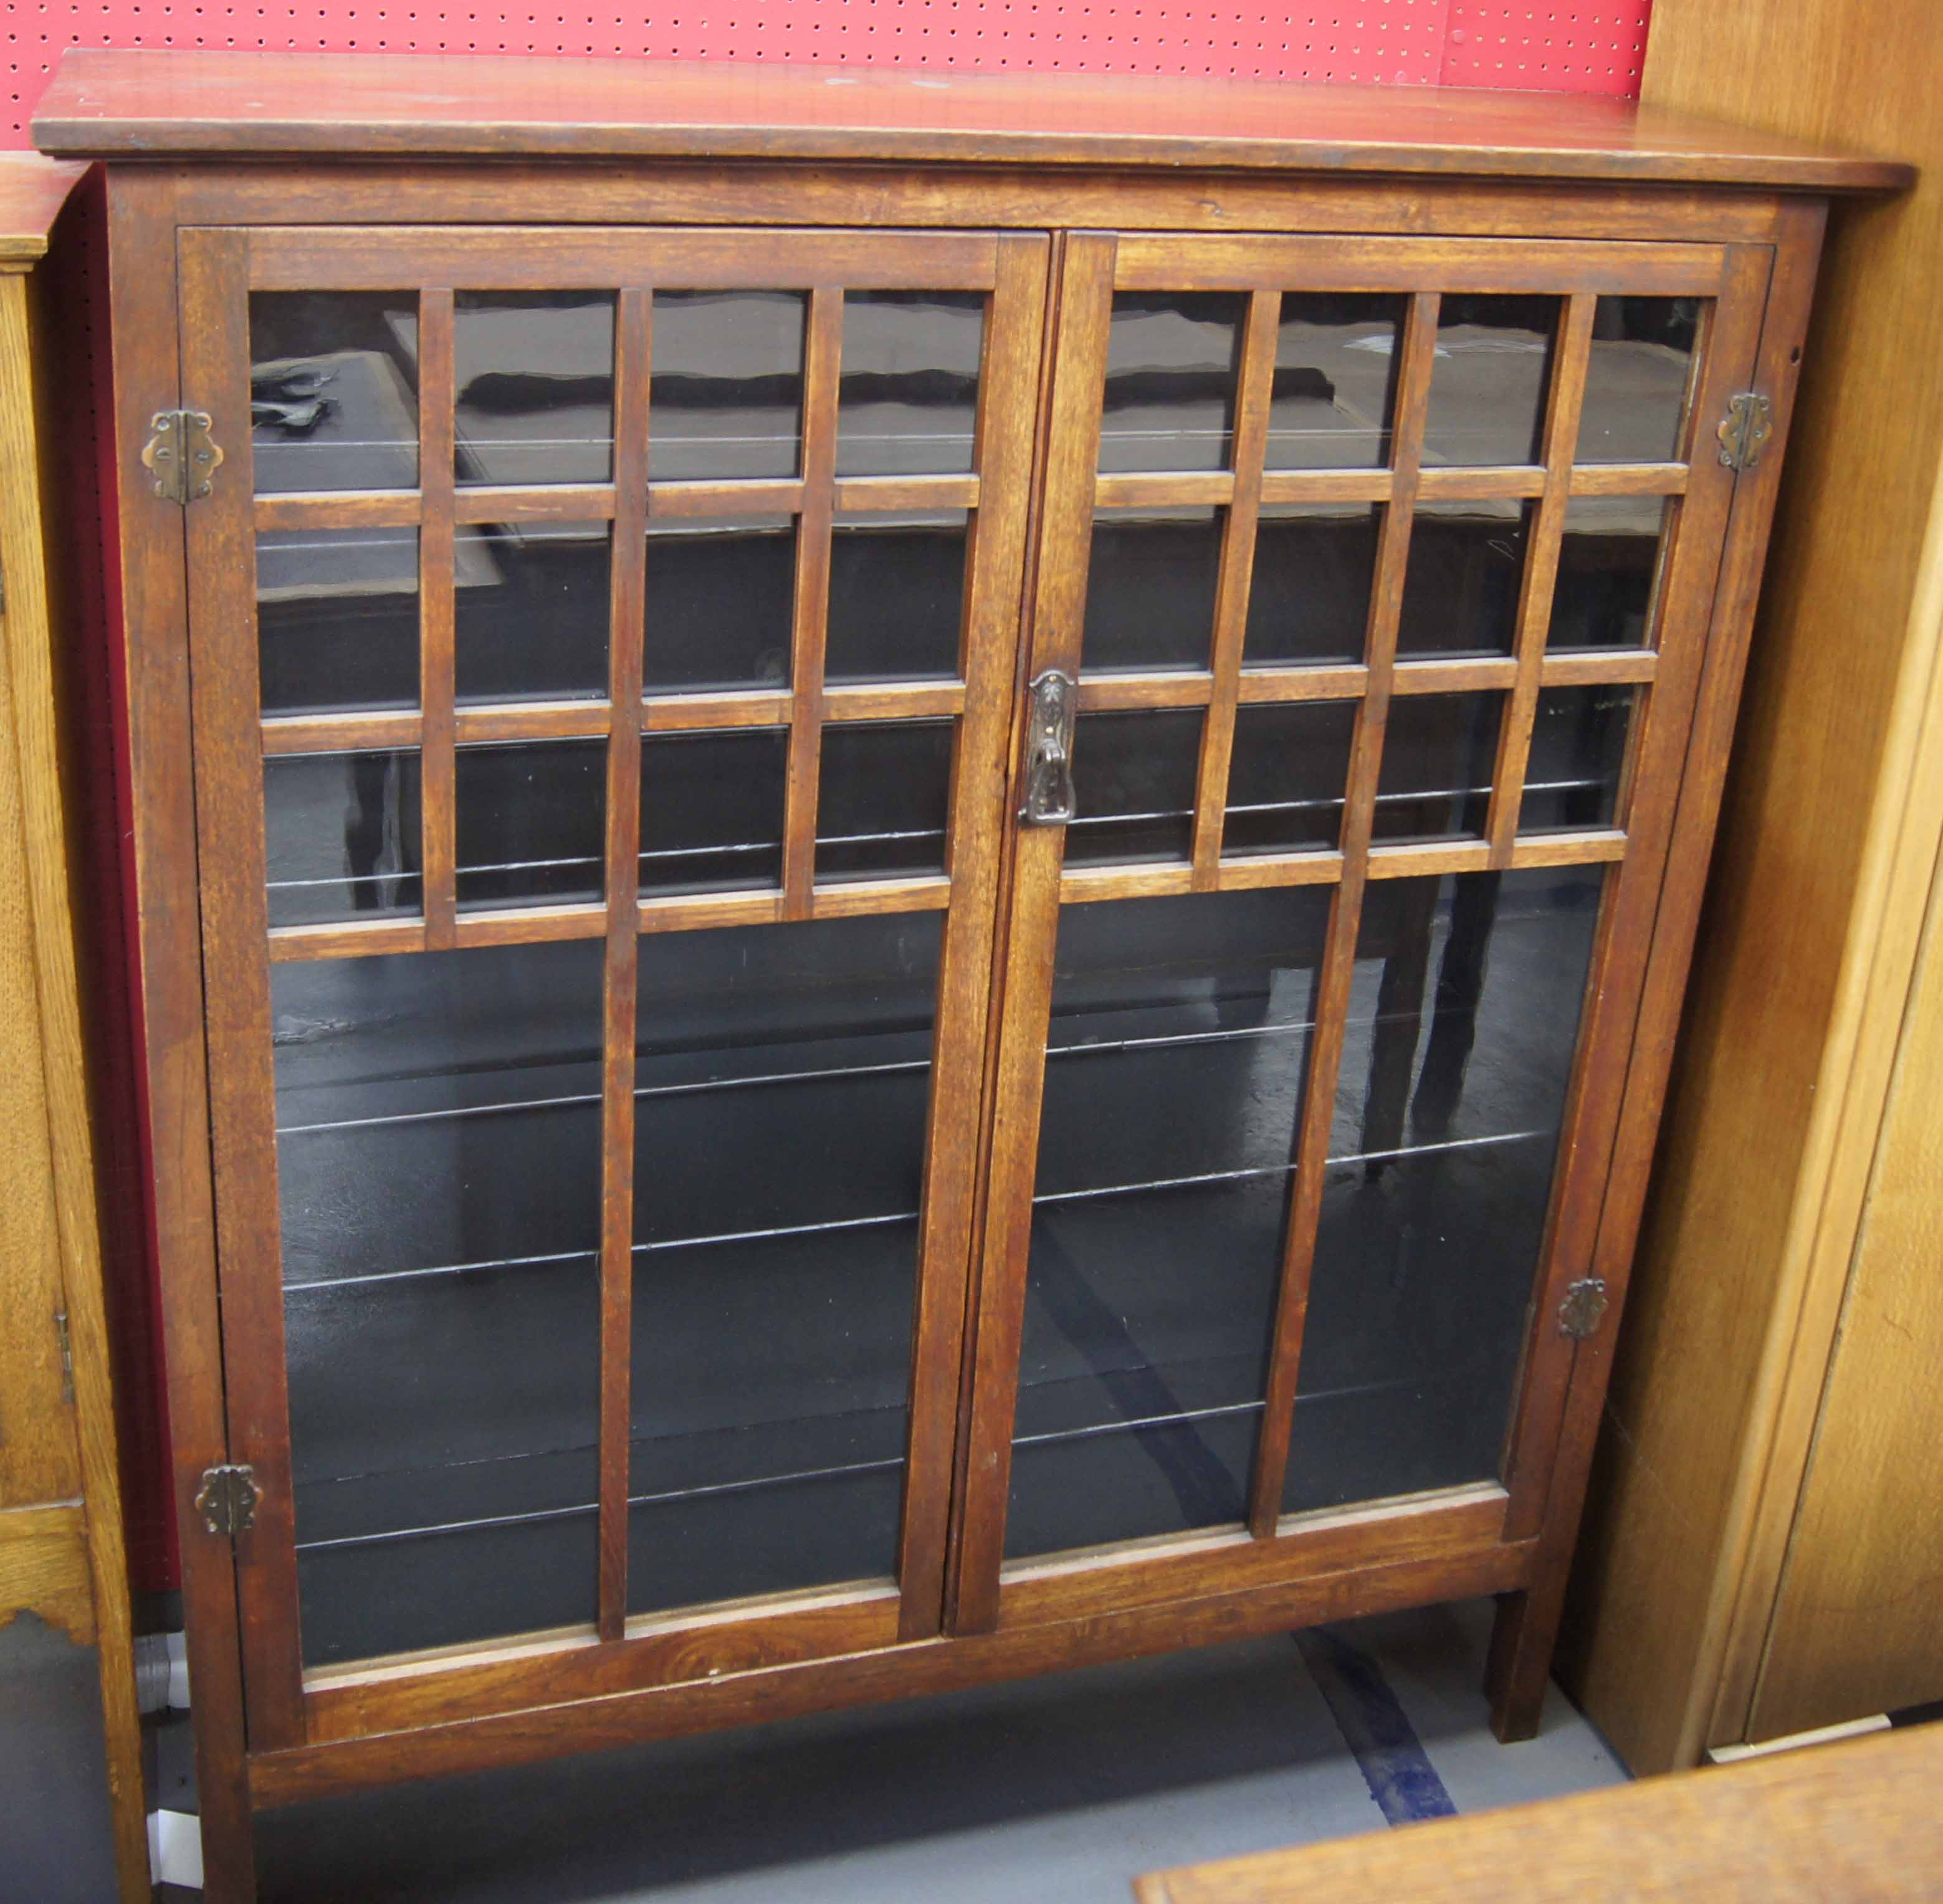 Late 19th early 20th c mahogany arts and crafts design book display cabinet with wood integral